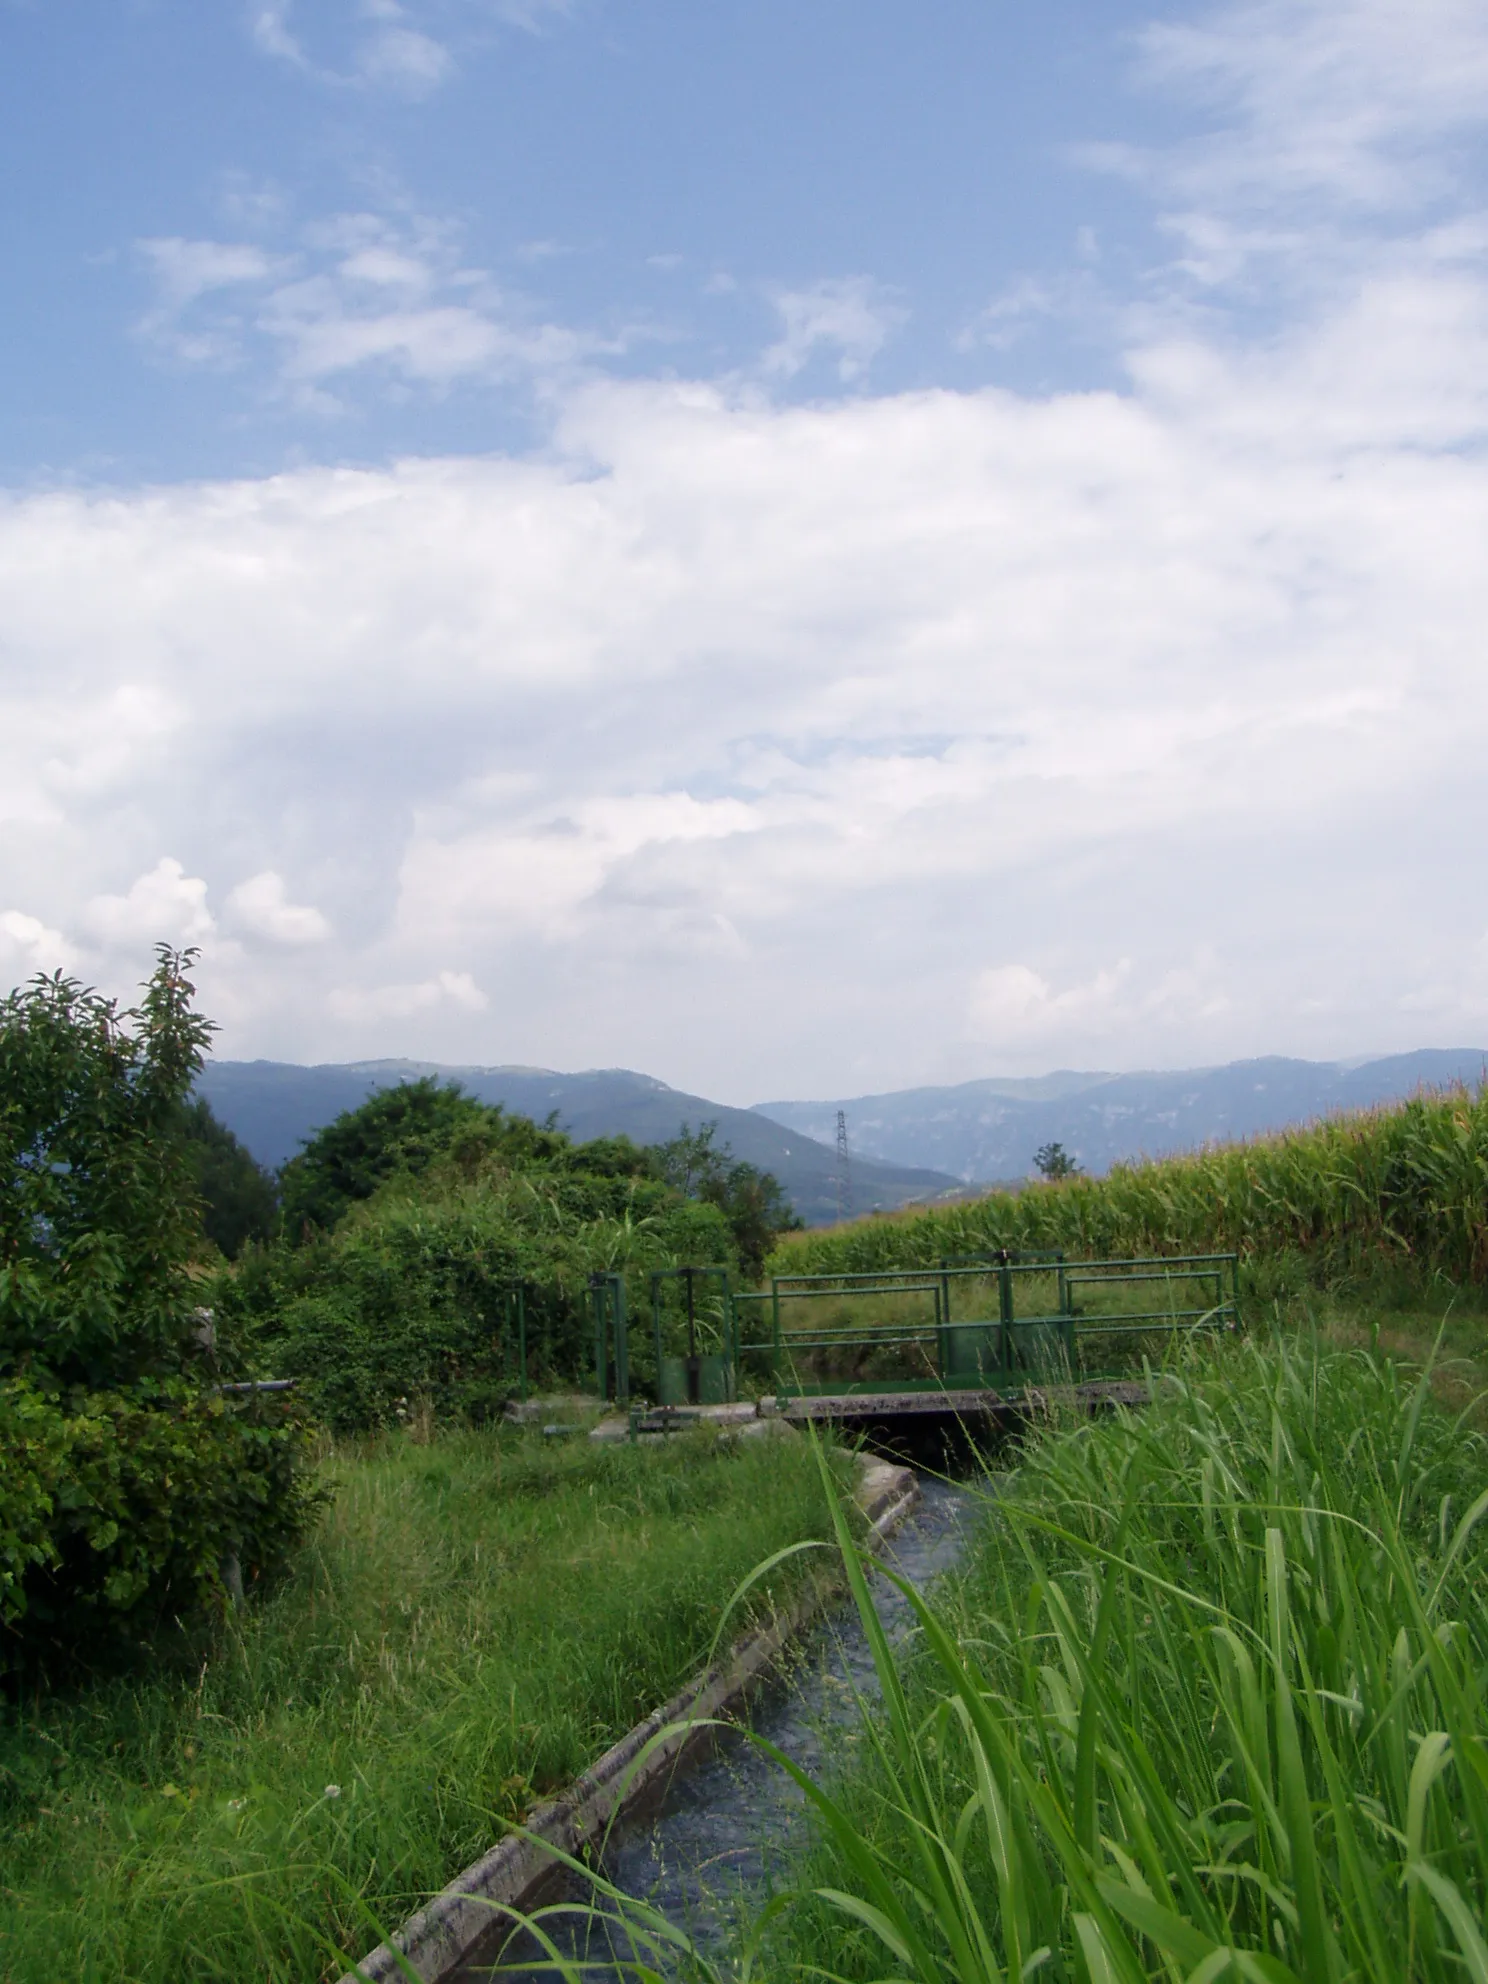 Photo showing: A "rosta" (Venetian for irrigation ditch) flowing in Parco delle Rogge rural Park, Bassano del Grappa.
In the background, the Asiago plateau or "Sette Comuni" plateau (on the left) and Grappa mountain (on the right)